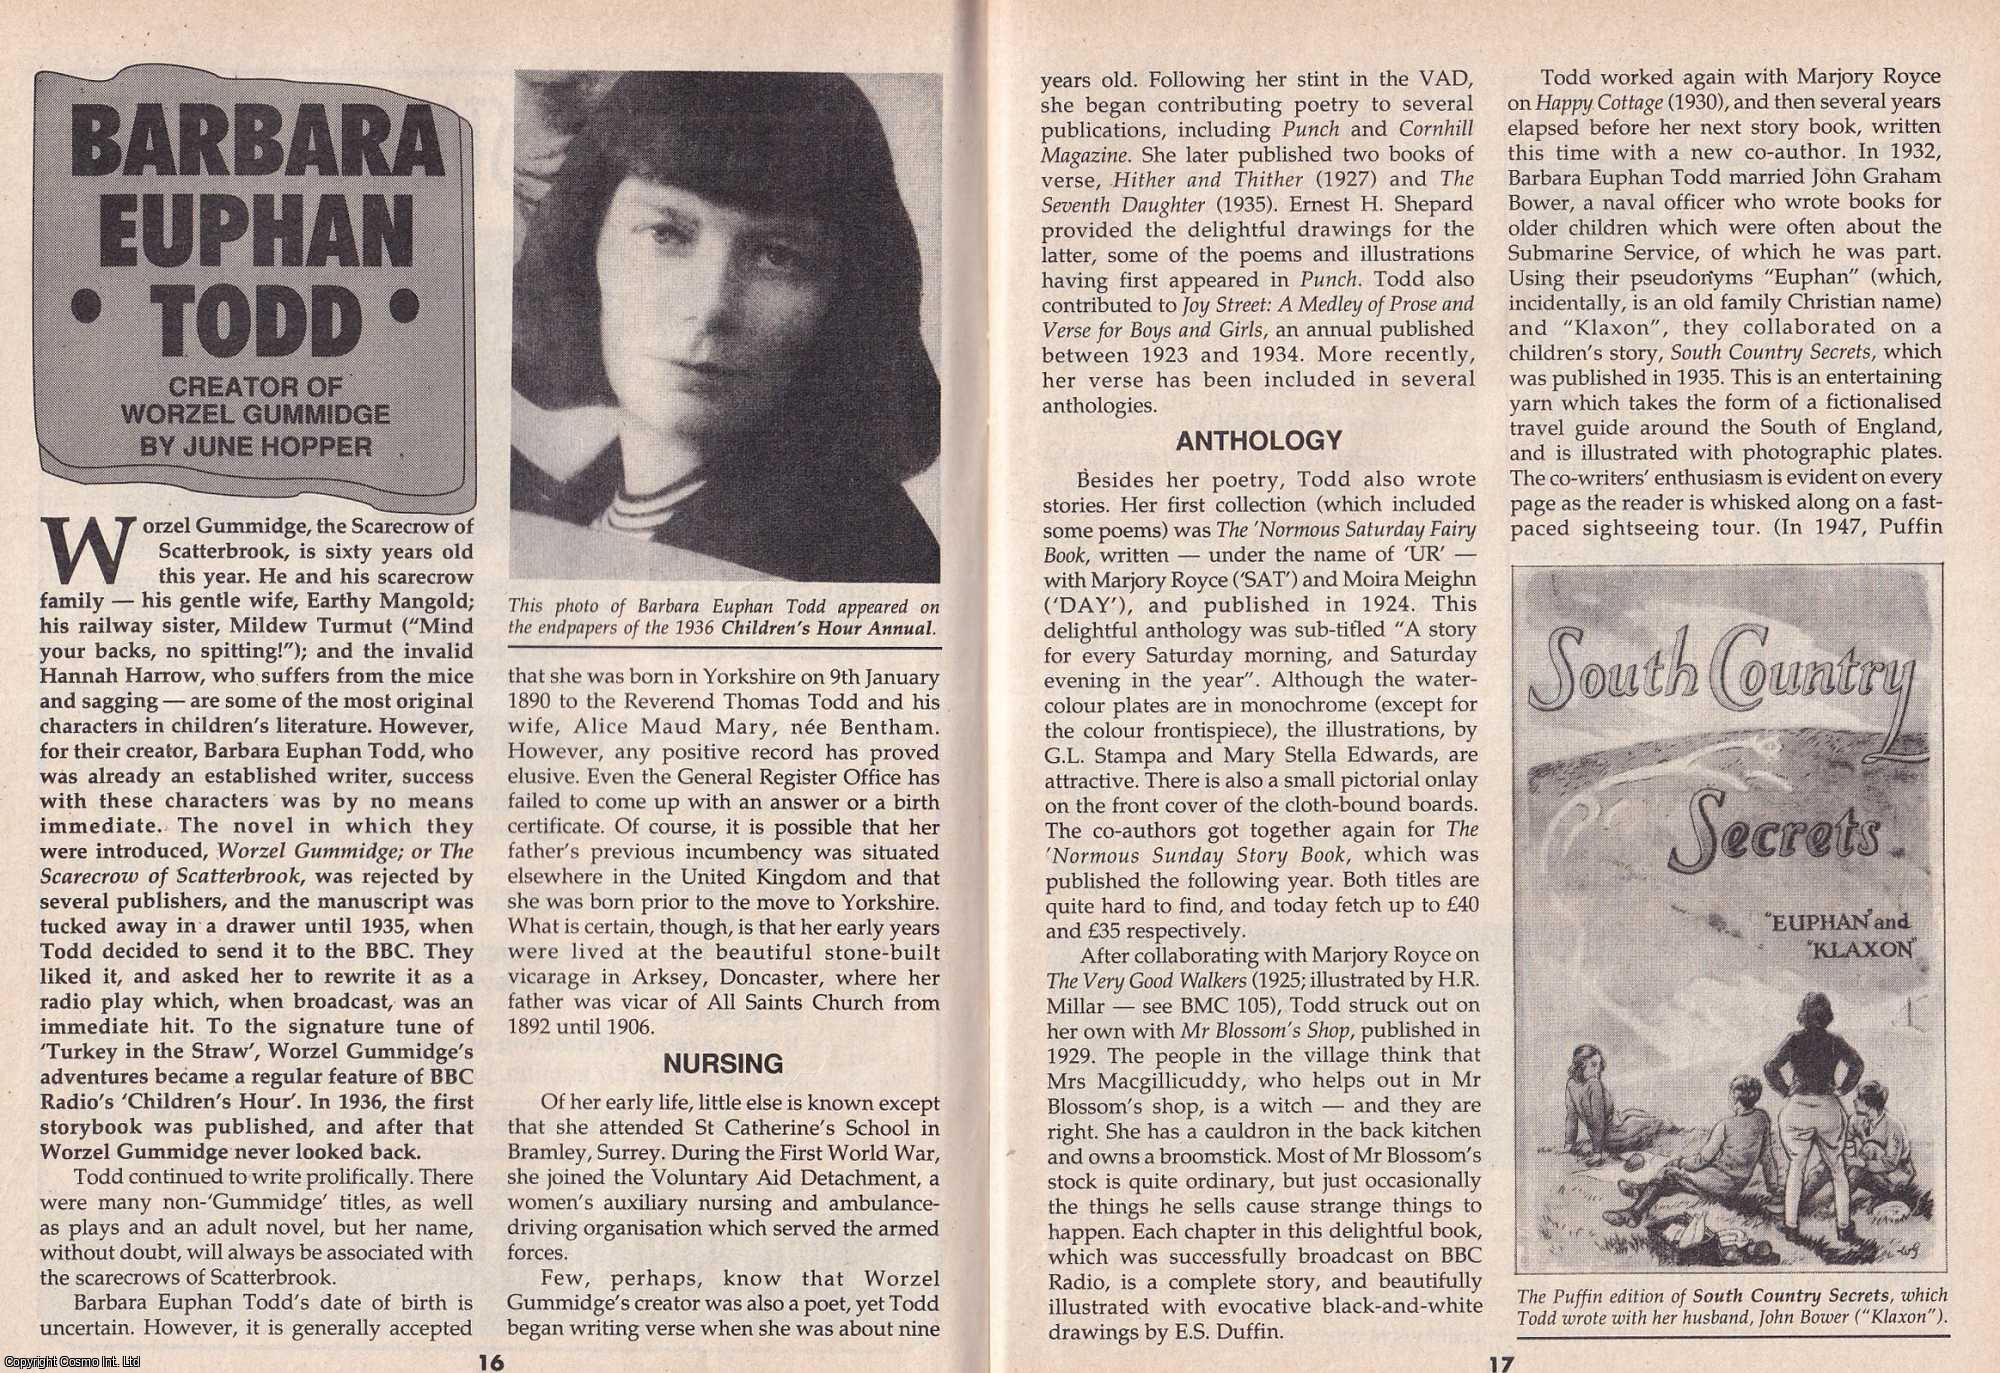 June Hopper - Barbara Euphan Todd. Creator of Worzel Gummidge. This is an original article separated from an issue of The Book & Magazine Collector publication.